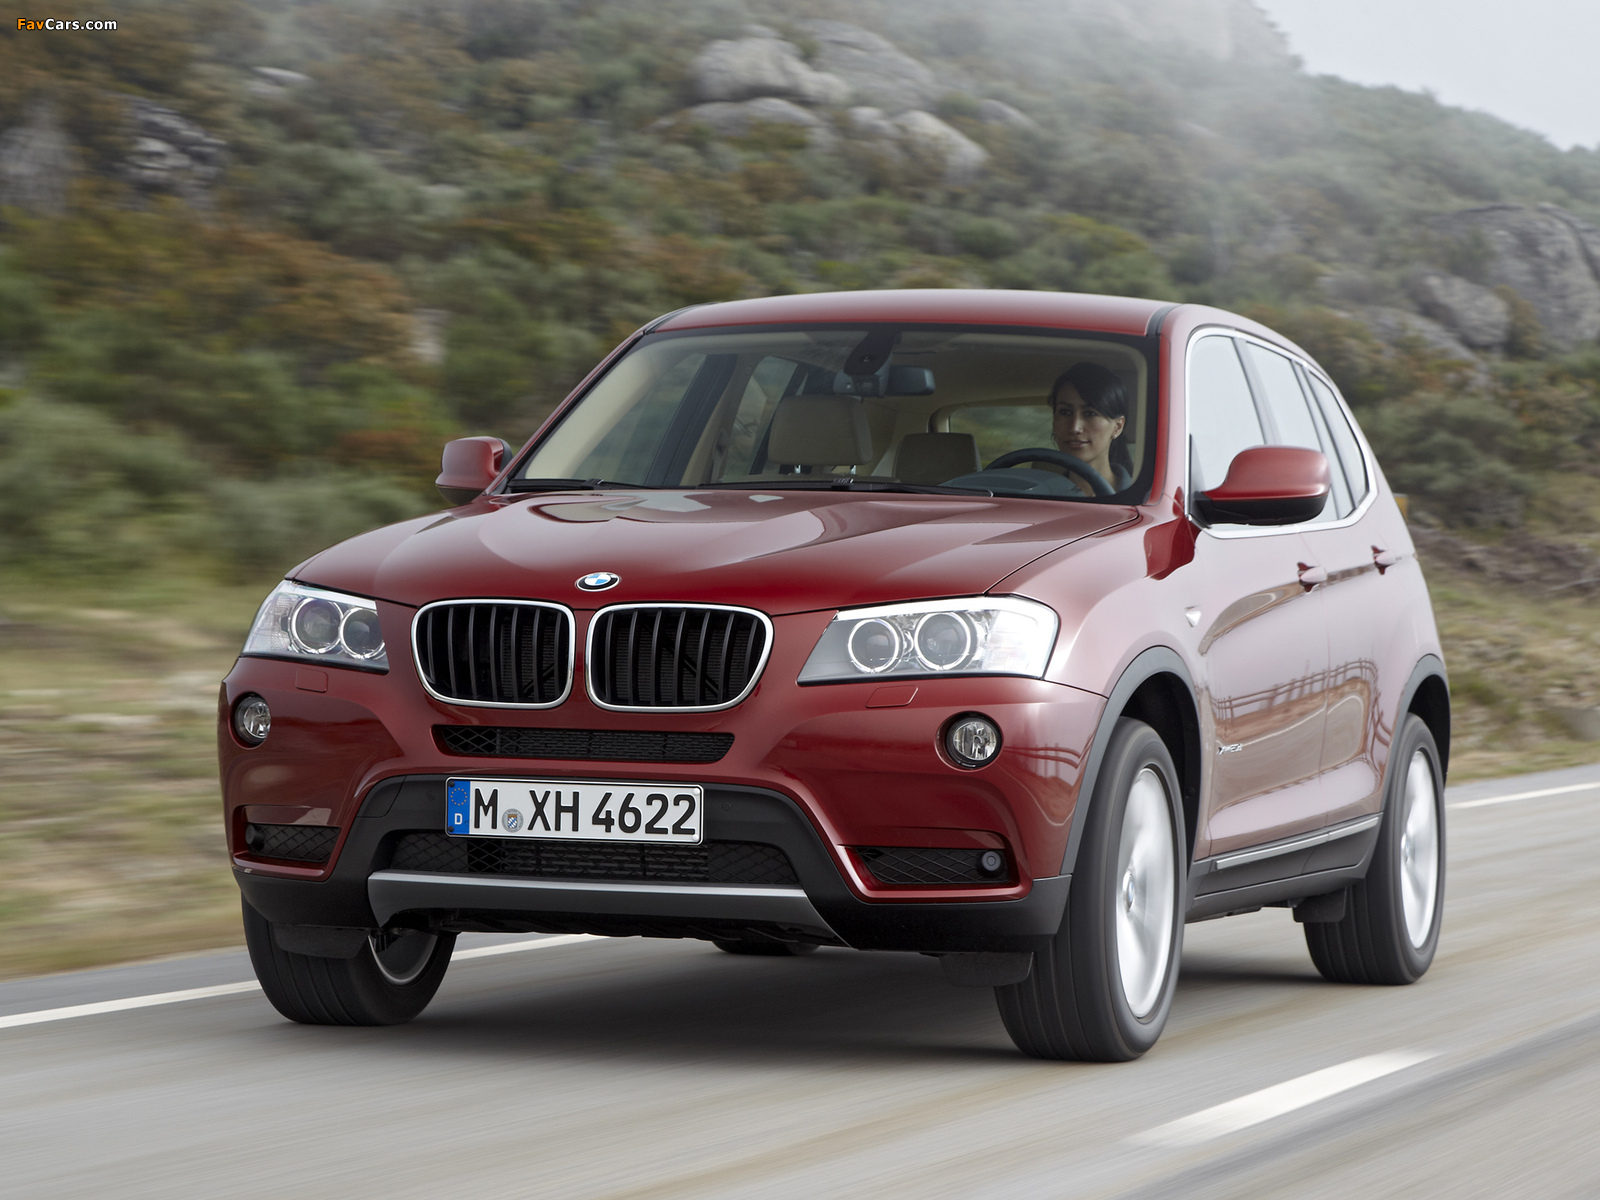 BMW X3 xDrive20d (F25) 2010 pictures (1600 x 1200)